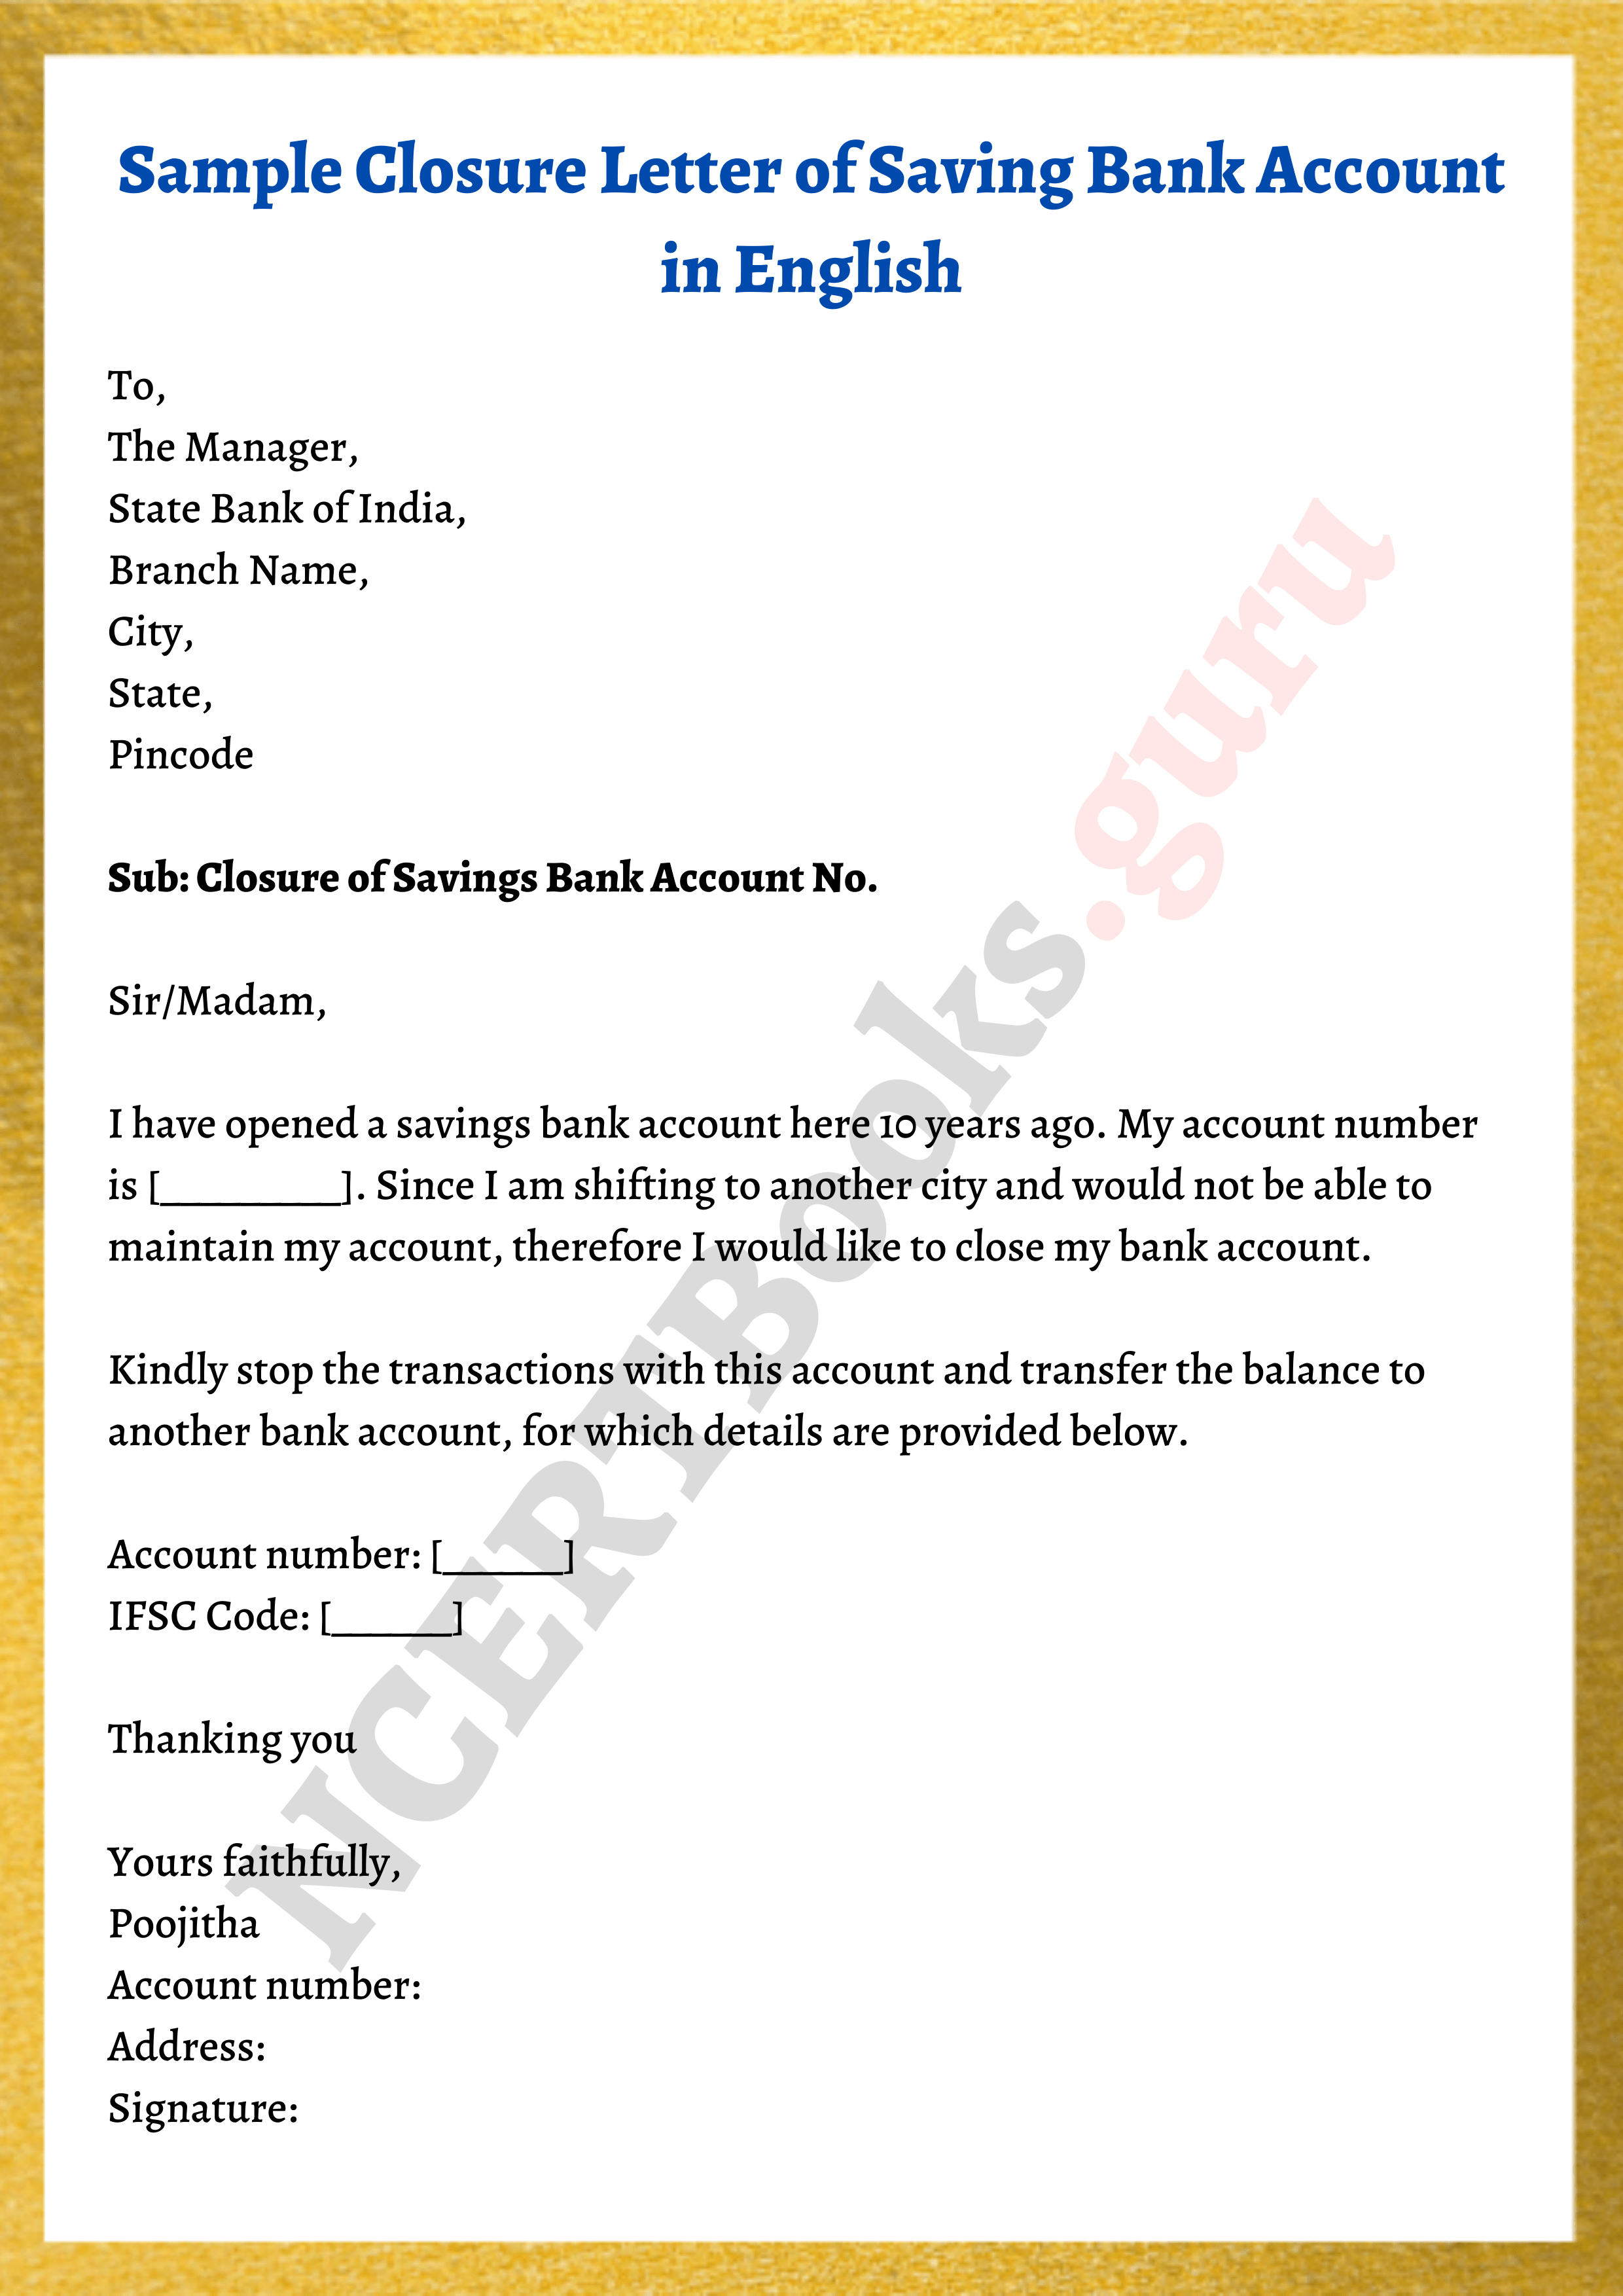 bank account closing letter sample formats | how to write a easily? nurse practitioner resume skills writing your first cv